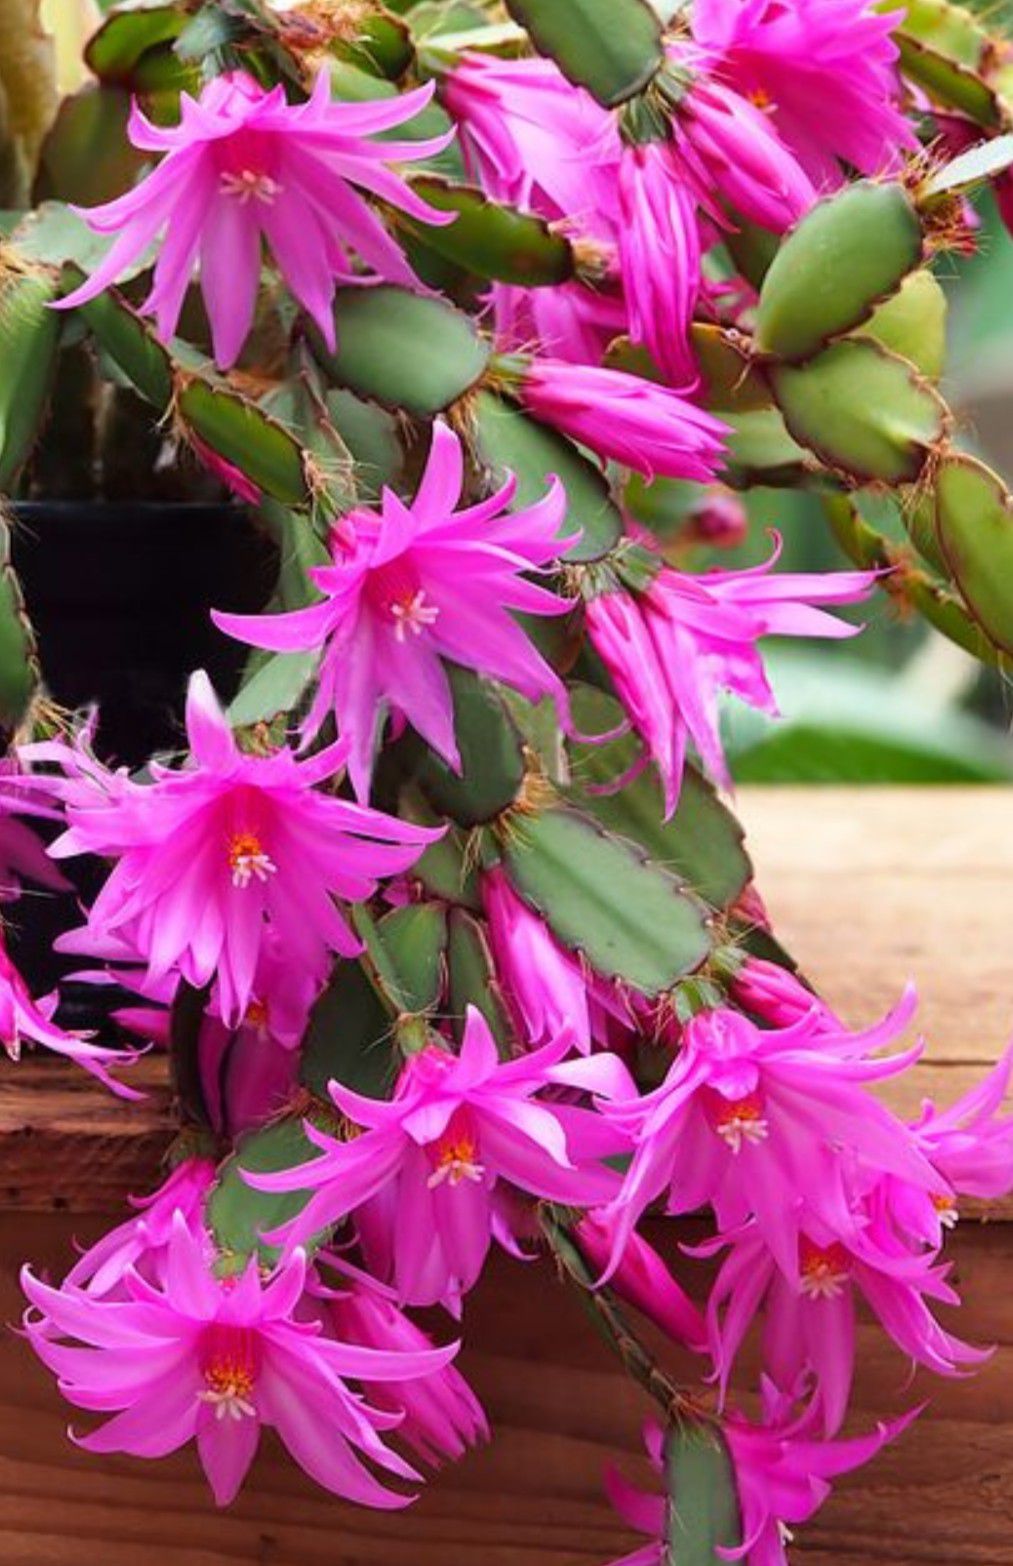 Christmas cactus each pot from$6-$15